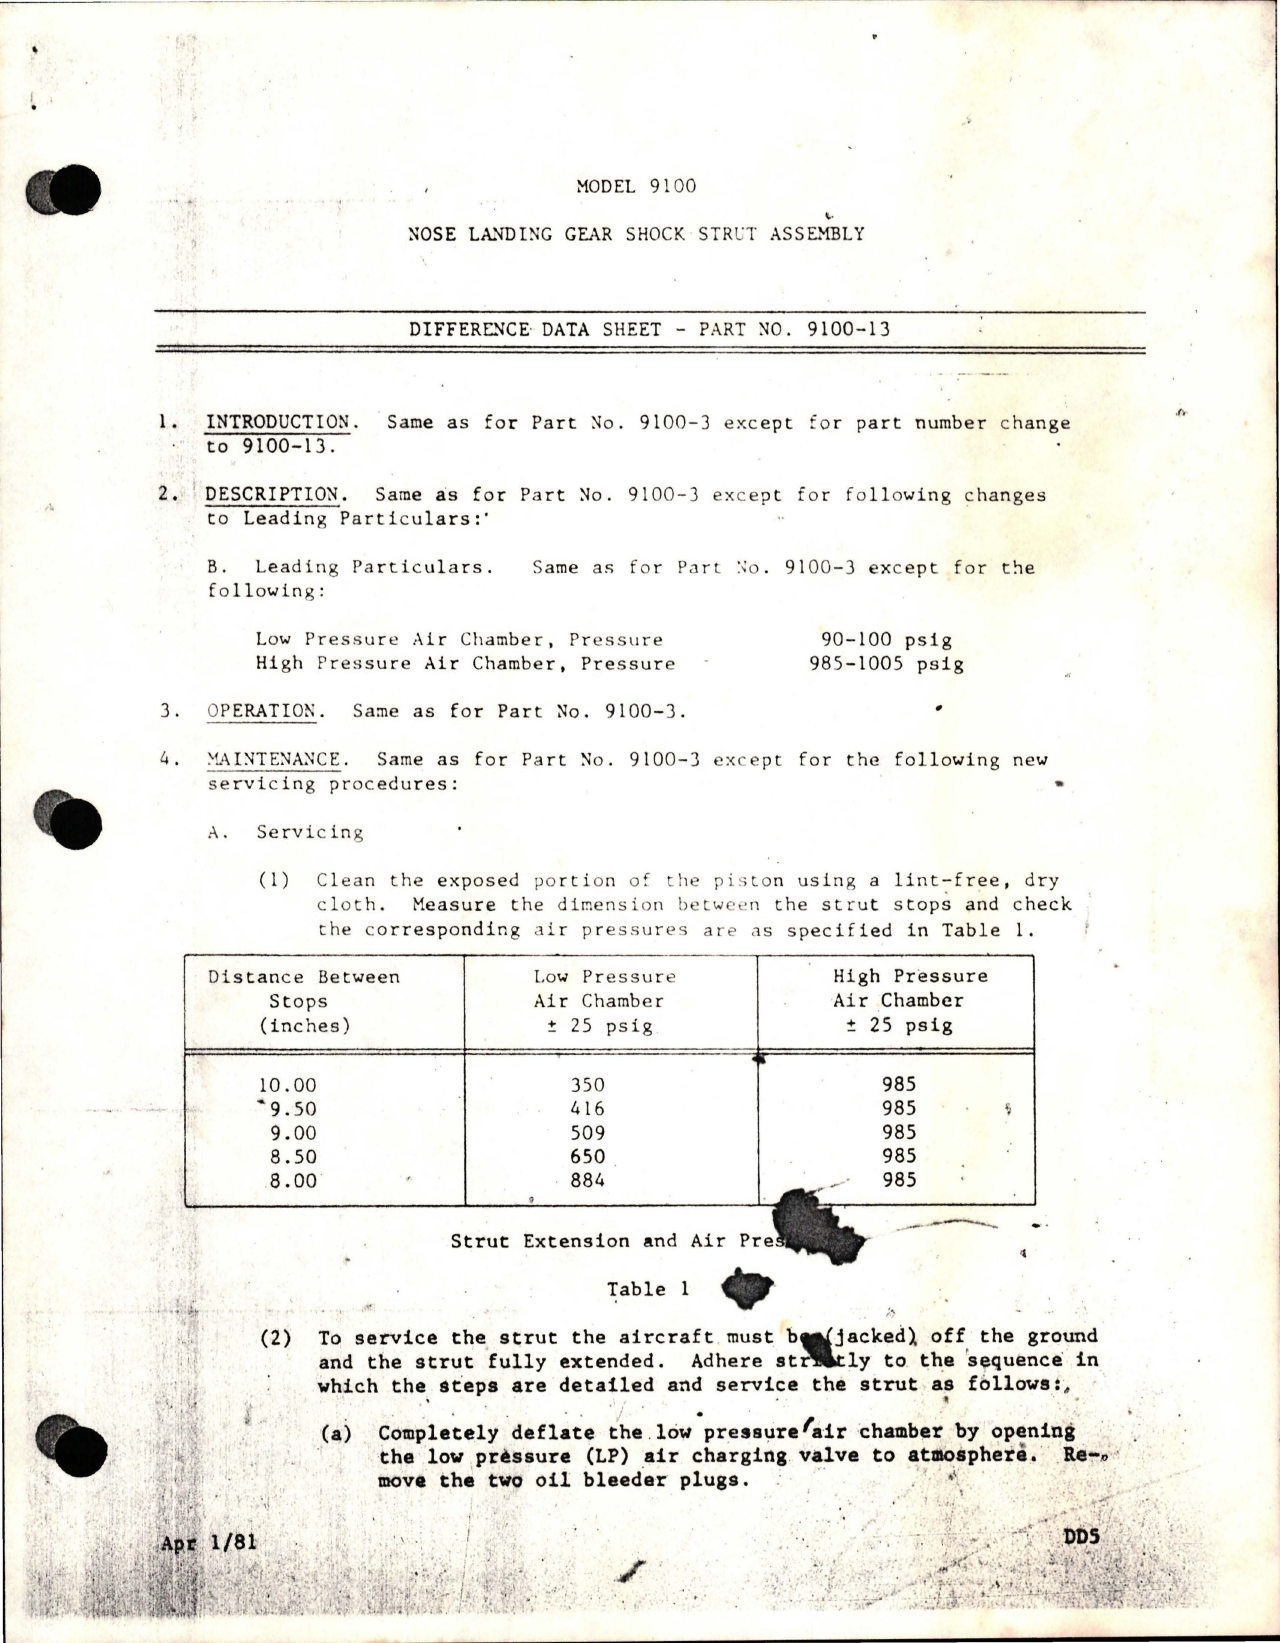 Sample page 1 from AirCorps Library document: Difference Data Sheet for Nose Landing Gear Shock Strut Assembly - Part 9100-13